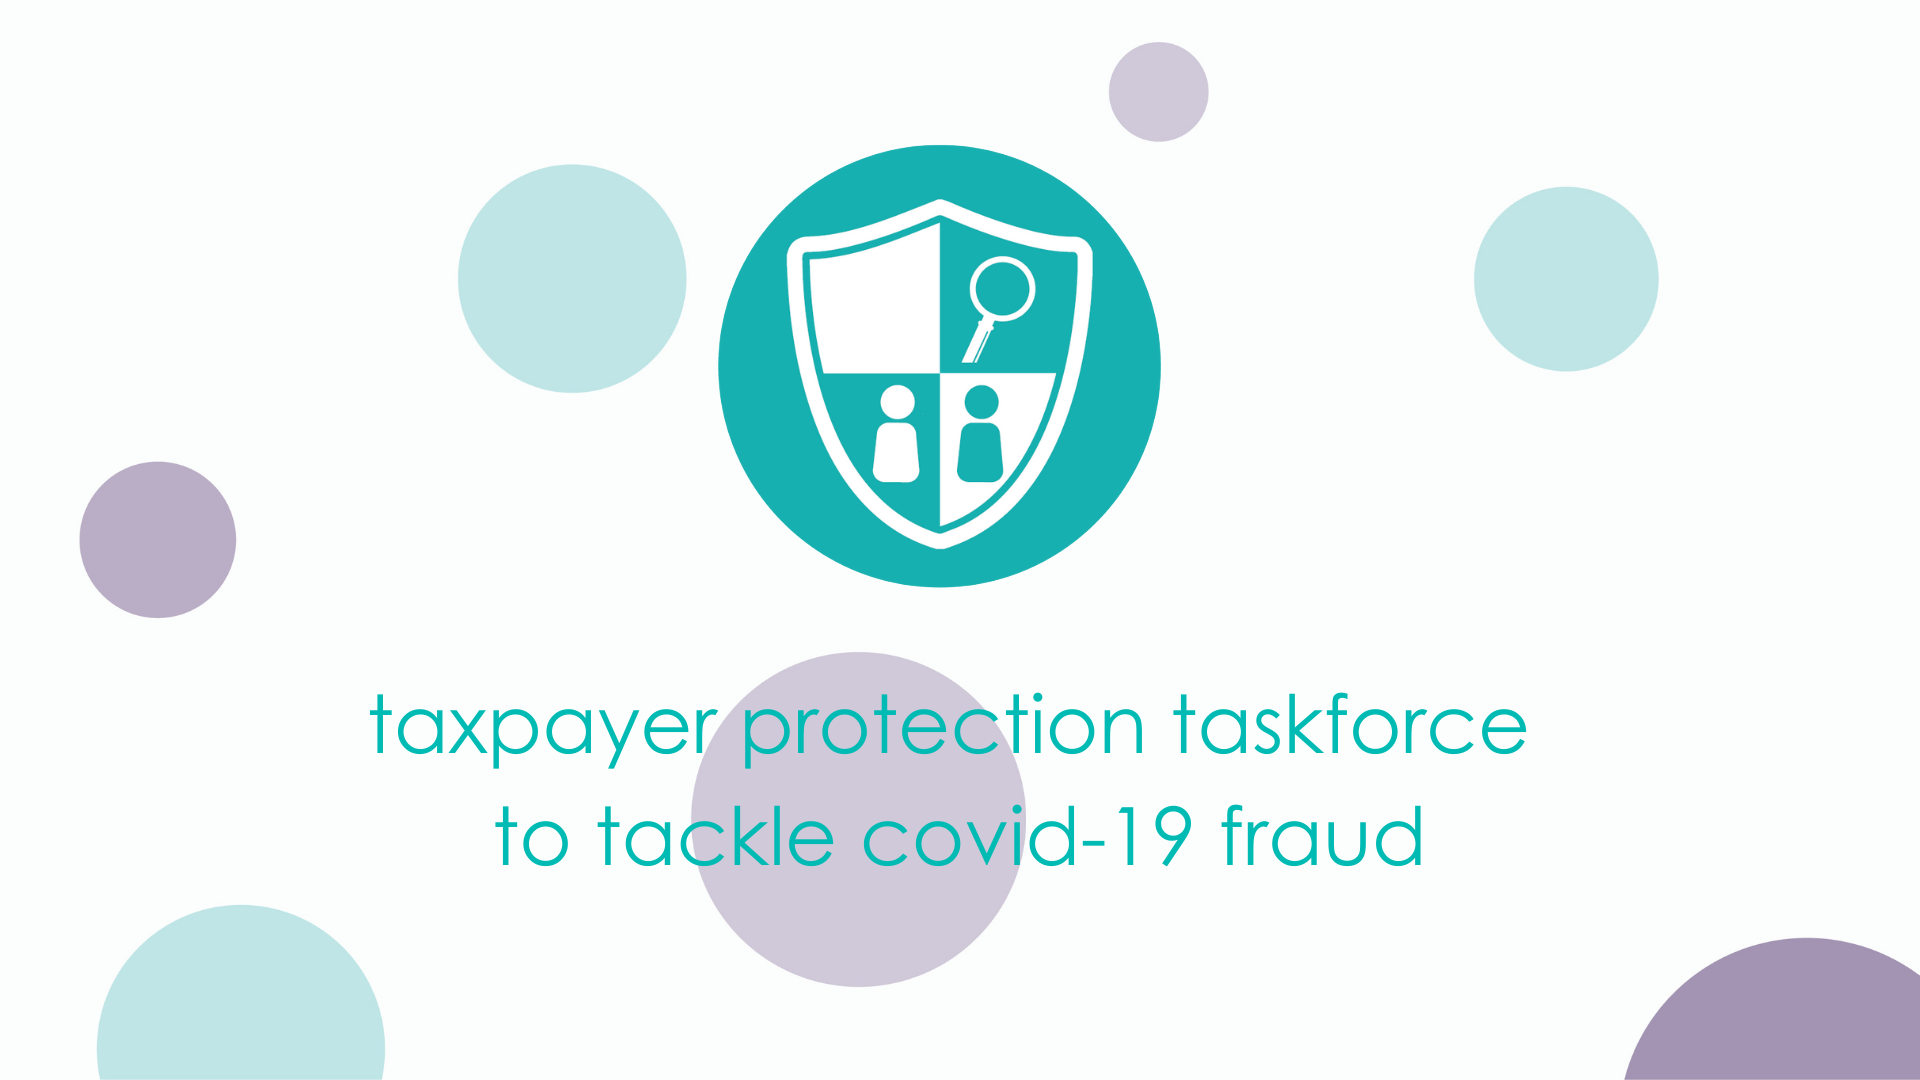 Taxpayer Protection Taskforce to tackle Covid-19 fraud